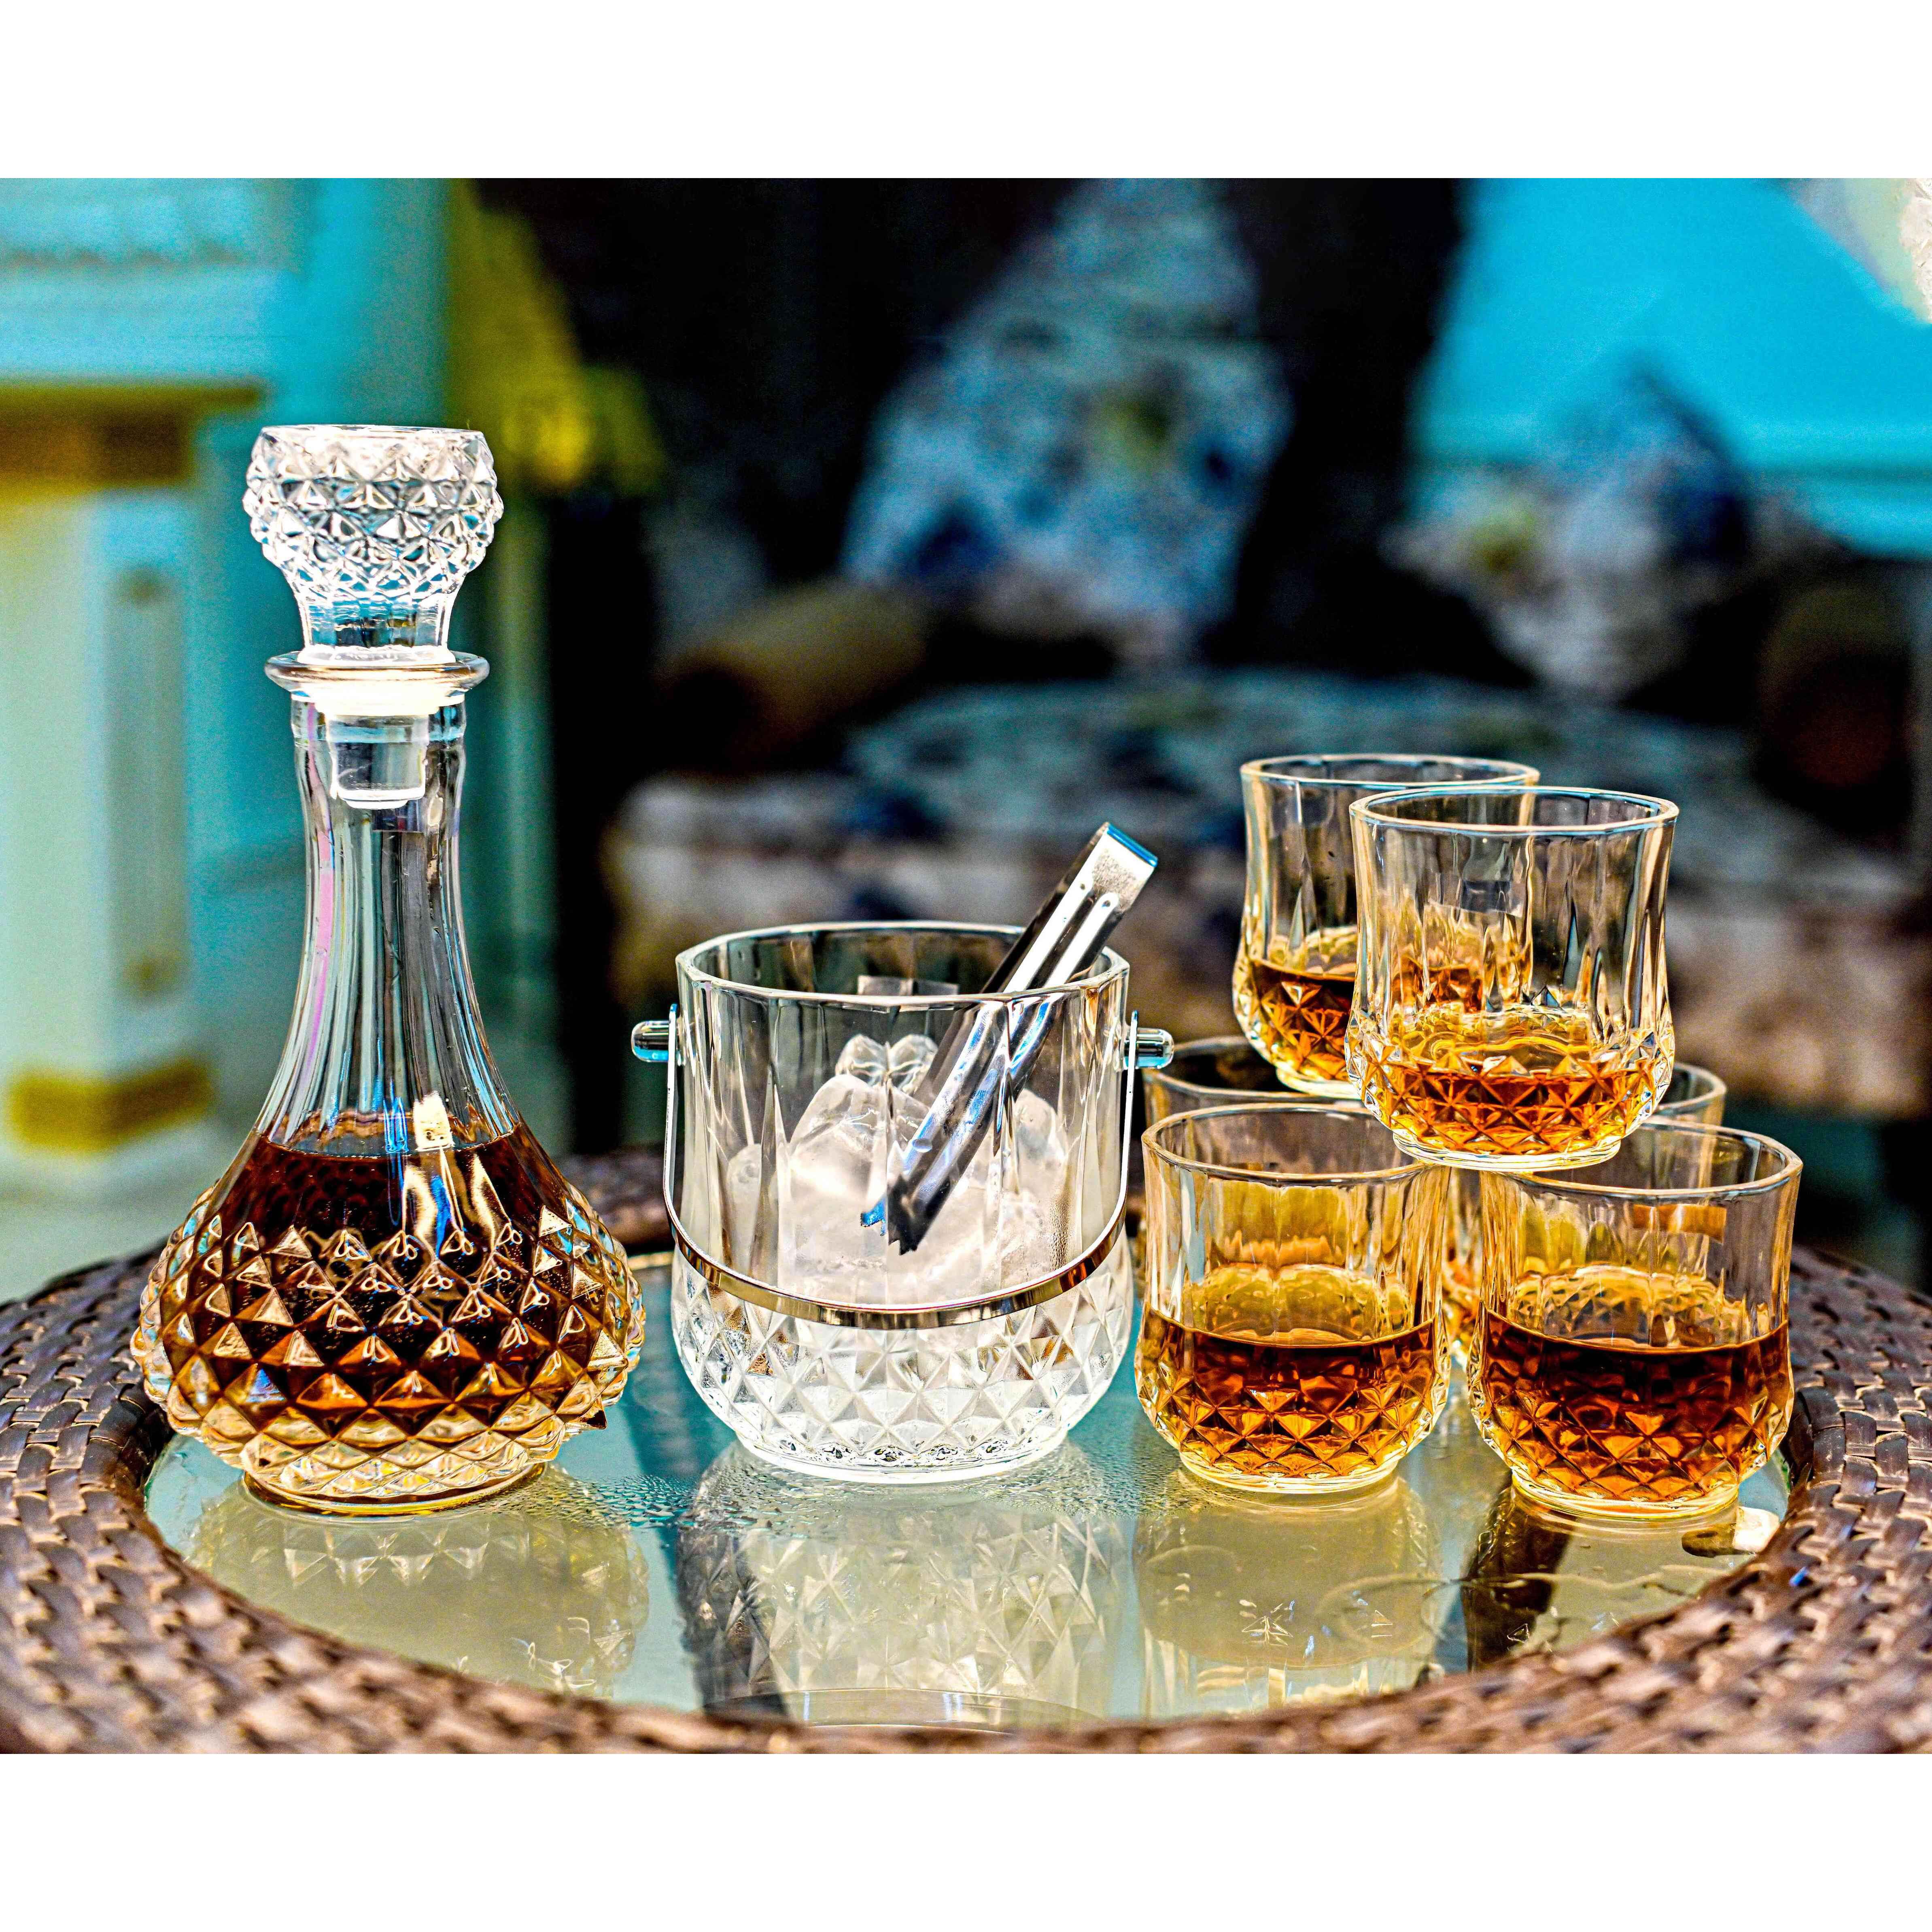 Diamond Whiskey Crystal Decanter Set With Glasses